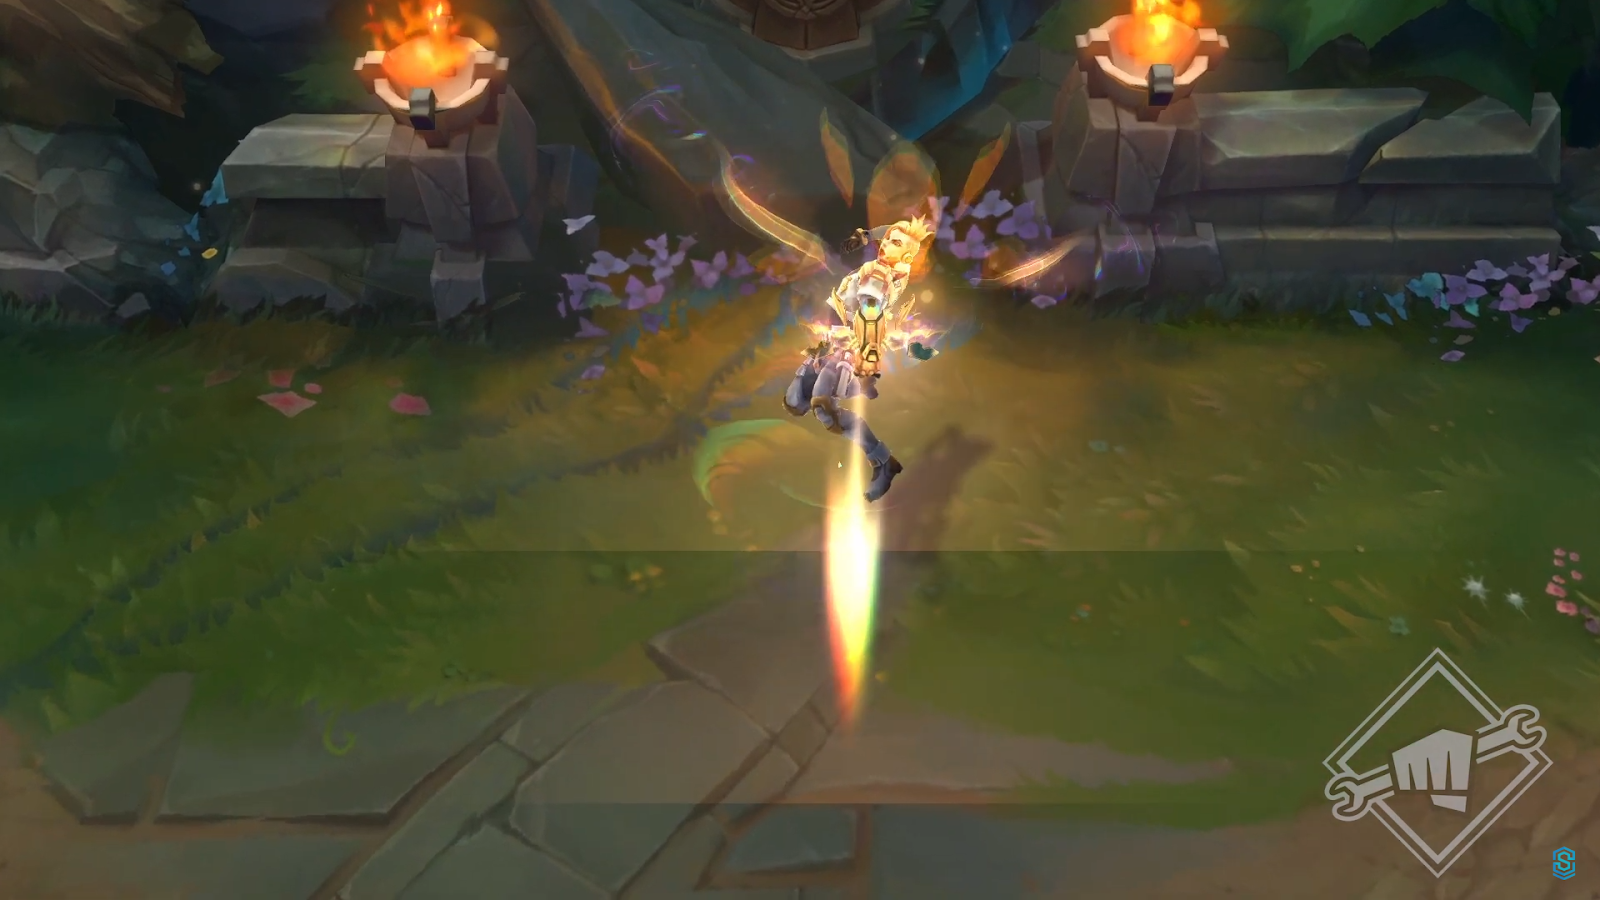 ezreal-chiem-danh-hieu-miss-fortune-thanh-vi-tuong-co-nhieu-skin-nhat